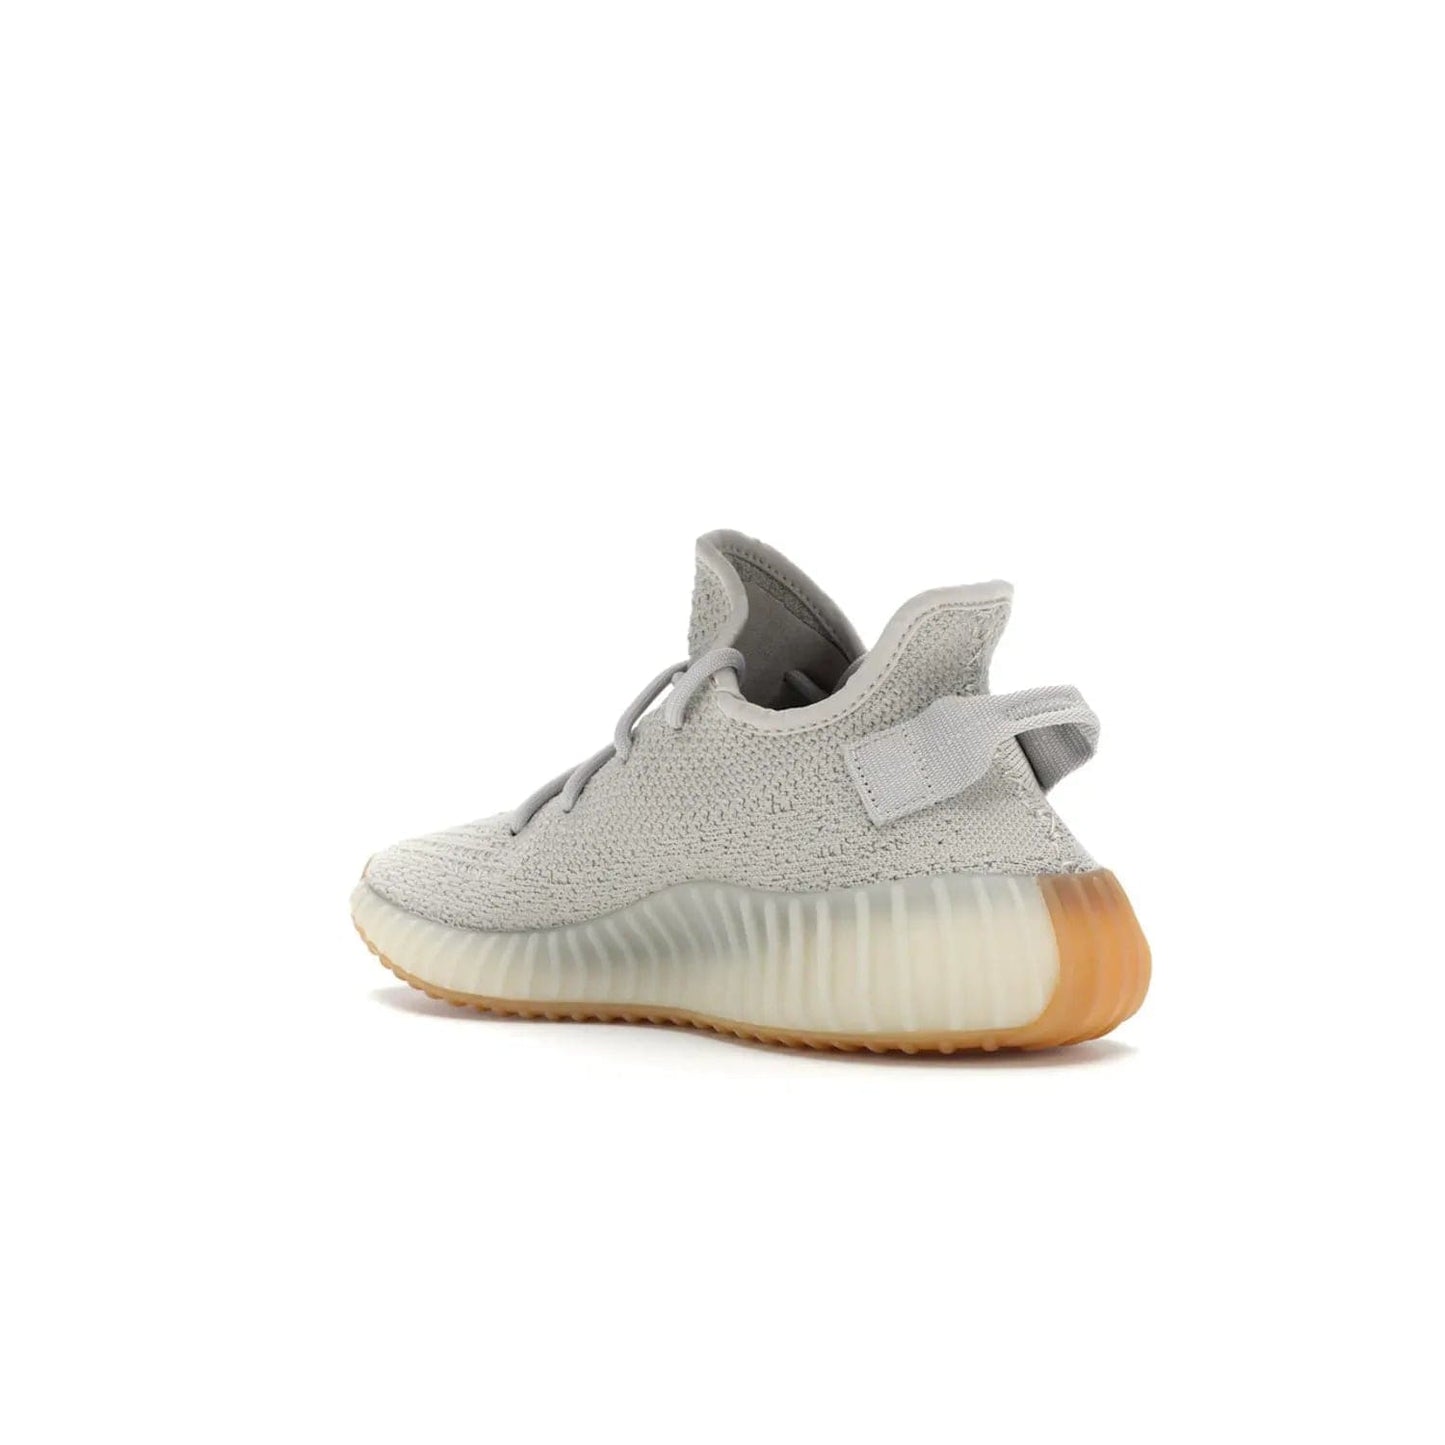 adidas Yeezy Boost 350 V2 Sesame - Image 24 - Only at www.BallersClubKickz.com - Introducing the adidas Yeezy Boost 350 V2 Sesame. Featuring a sesame upper, midsole and gum sole for a sleek silhouette. Cop the stylish sneaker released in November 2018.